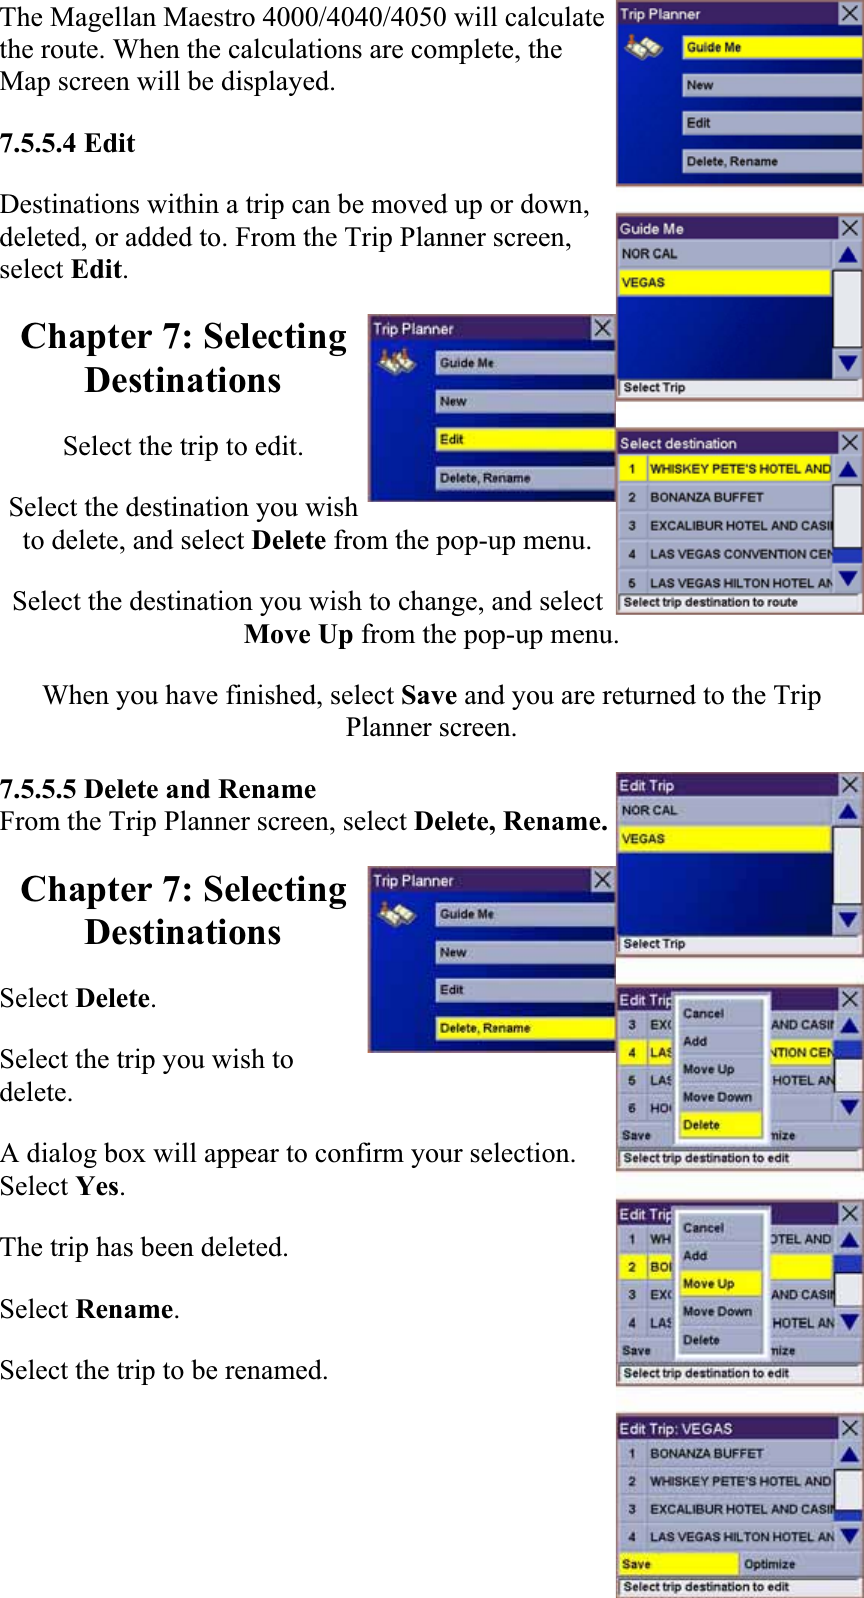 The Magellan Maestro 4000/4040/4050 will calculate the route. When the calculations are complete, the Map screen will be displayed.  7.5.5.4 EditDestinations within a trip can be moved up or down, deleted, or added to. From the Trip Planner screen, select Edit.Chapter 7: Selecting DestinationsSelect the trip to edit.  Select the destination you wish to delete, and select Delete from the pop-up menu.  Select the destination you wish to change, and select Move Up from the pop-up menu.  When you have finished, select Save and you are returned to the Trip Planner screen.7.5.5.5 Delete and Rename From the Trip Planner screen, select Delete, Rename. Chapter 7: Selecting DestinationsSelect Delete.Select the trip you wish to delete.  A dialog box will appear to confirm your selection. Select Yes.The trip has been deleted.  Select Rename.Select the trip to be renamed.  